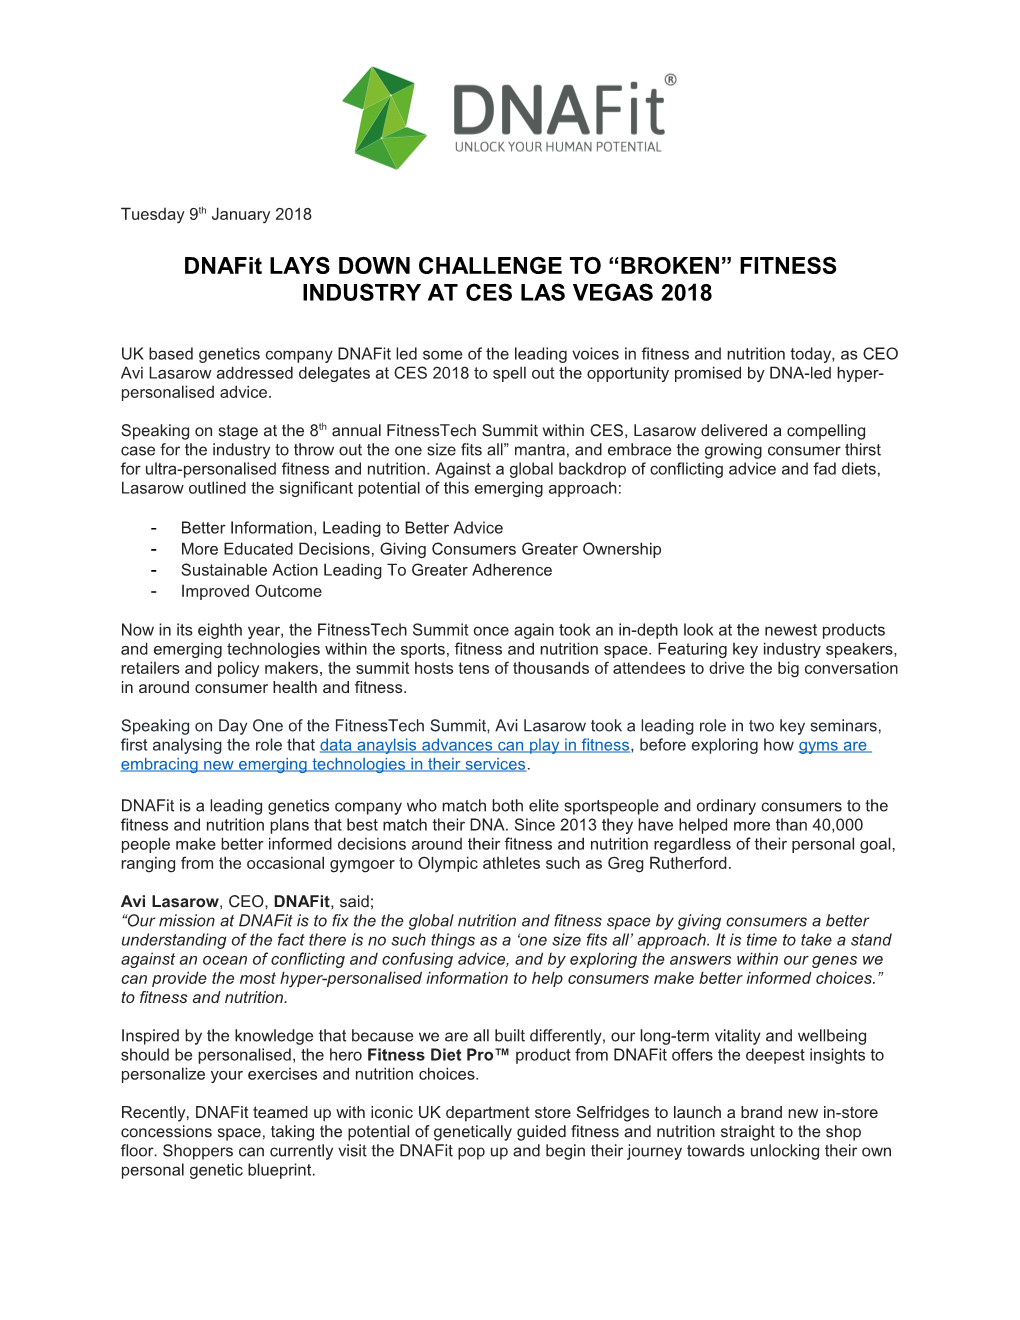 Dnafit LAYS DOWN CHALLENGE to BROKEN FITNESS INDUSTRY at CES LAS VEGAS 2018